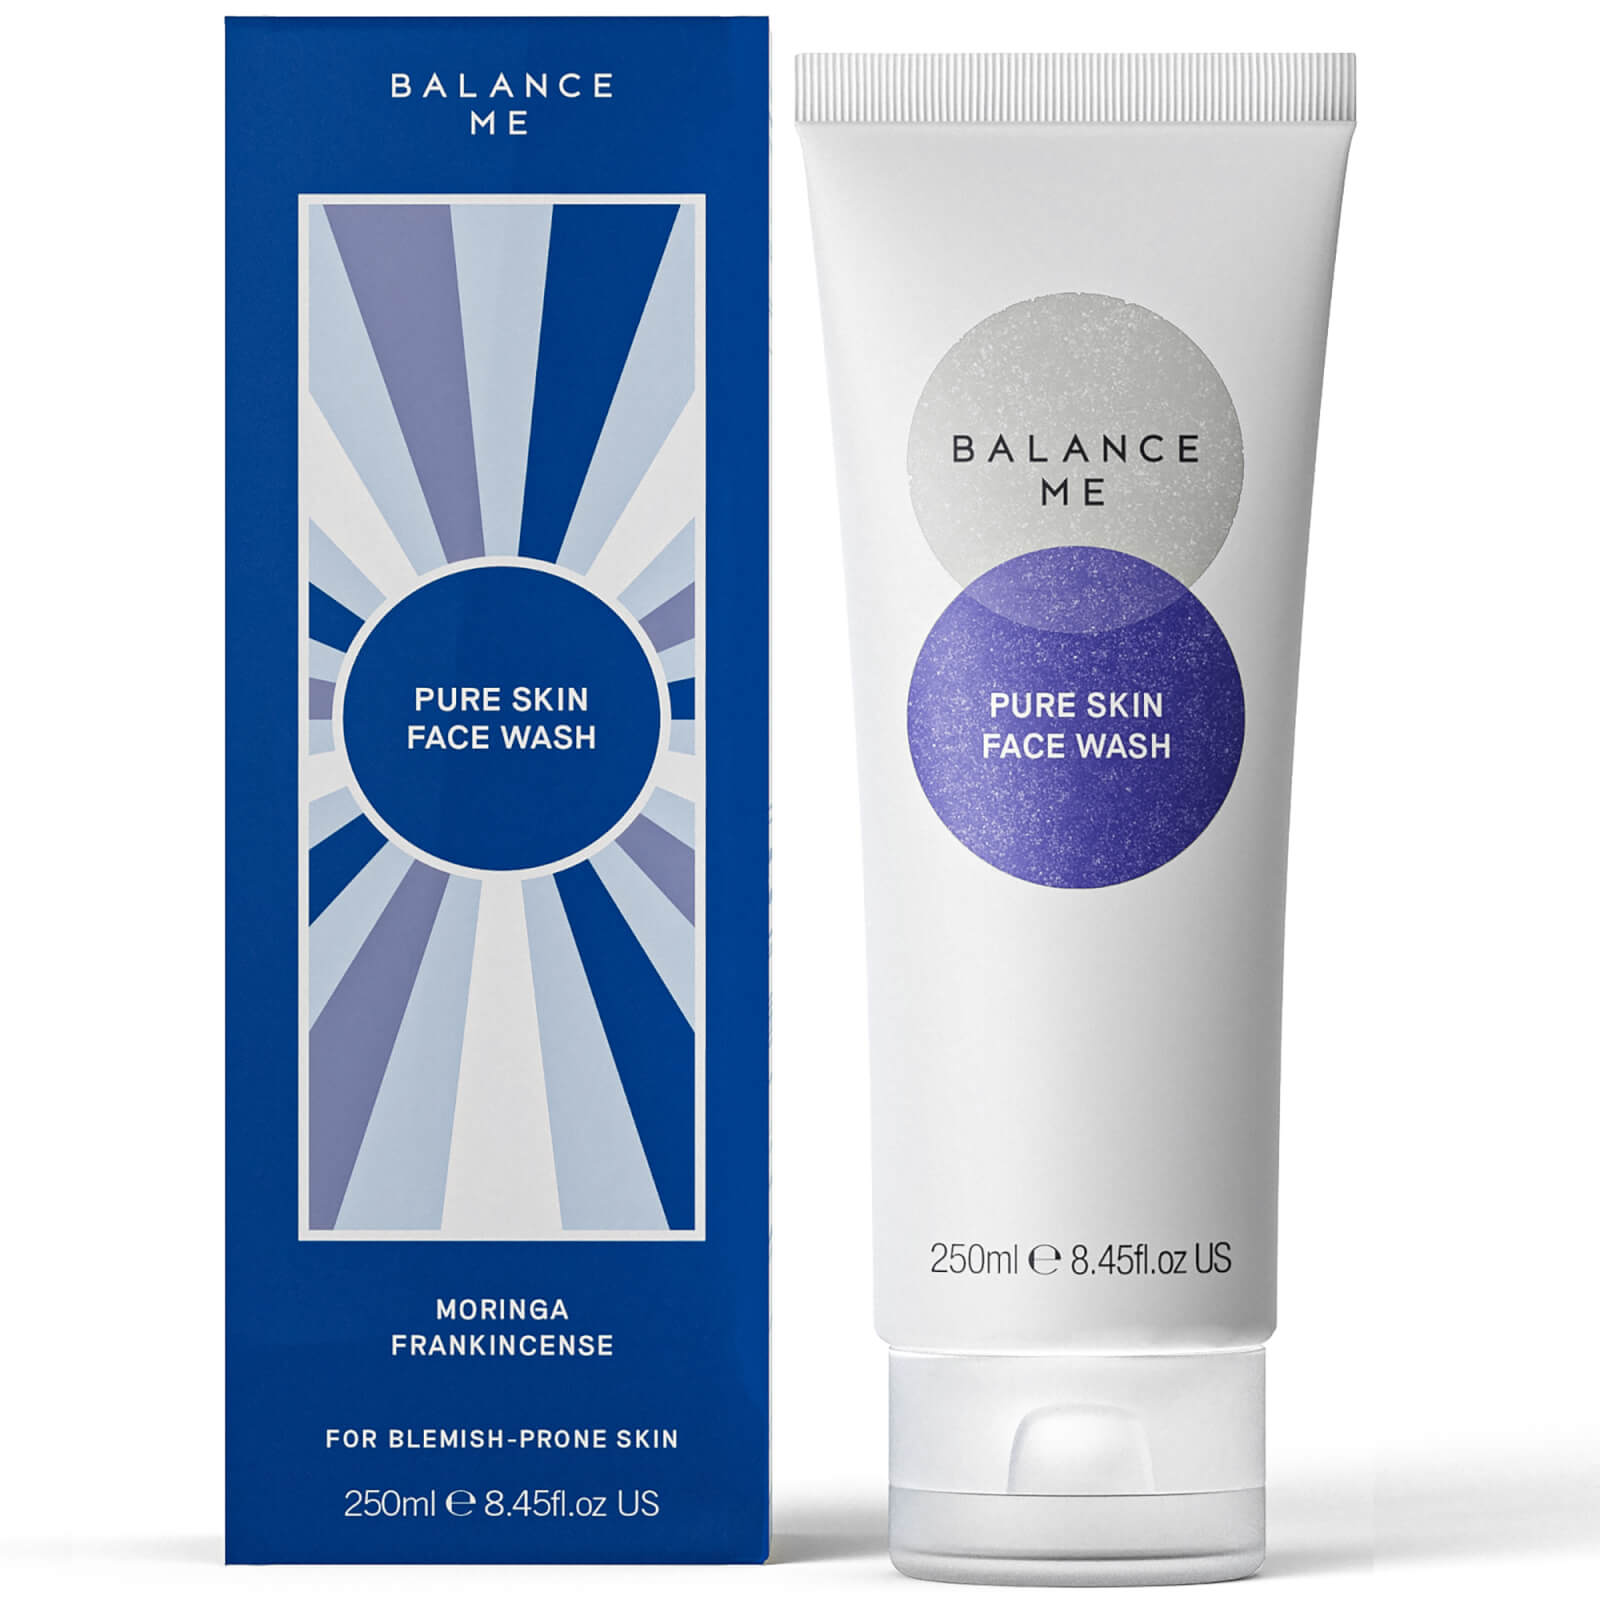 Balance Me Limited Edition Supersize Pure Skin Face Wash 250ml